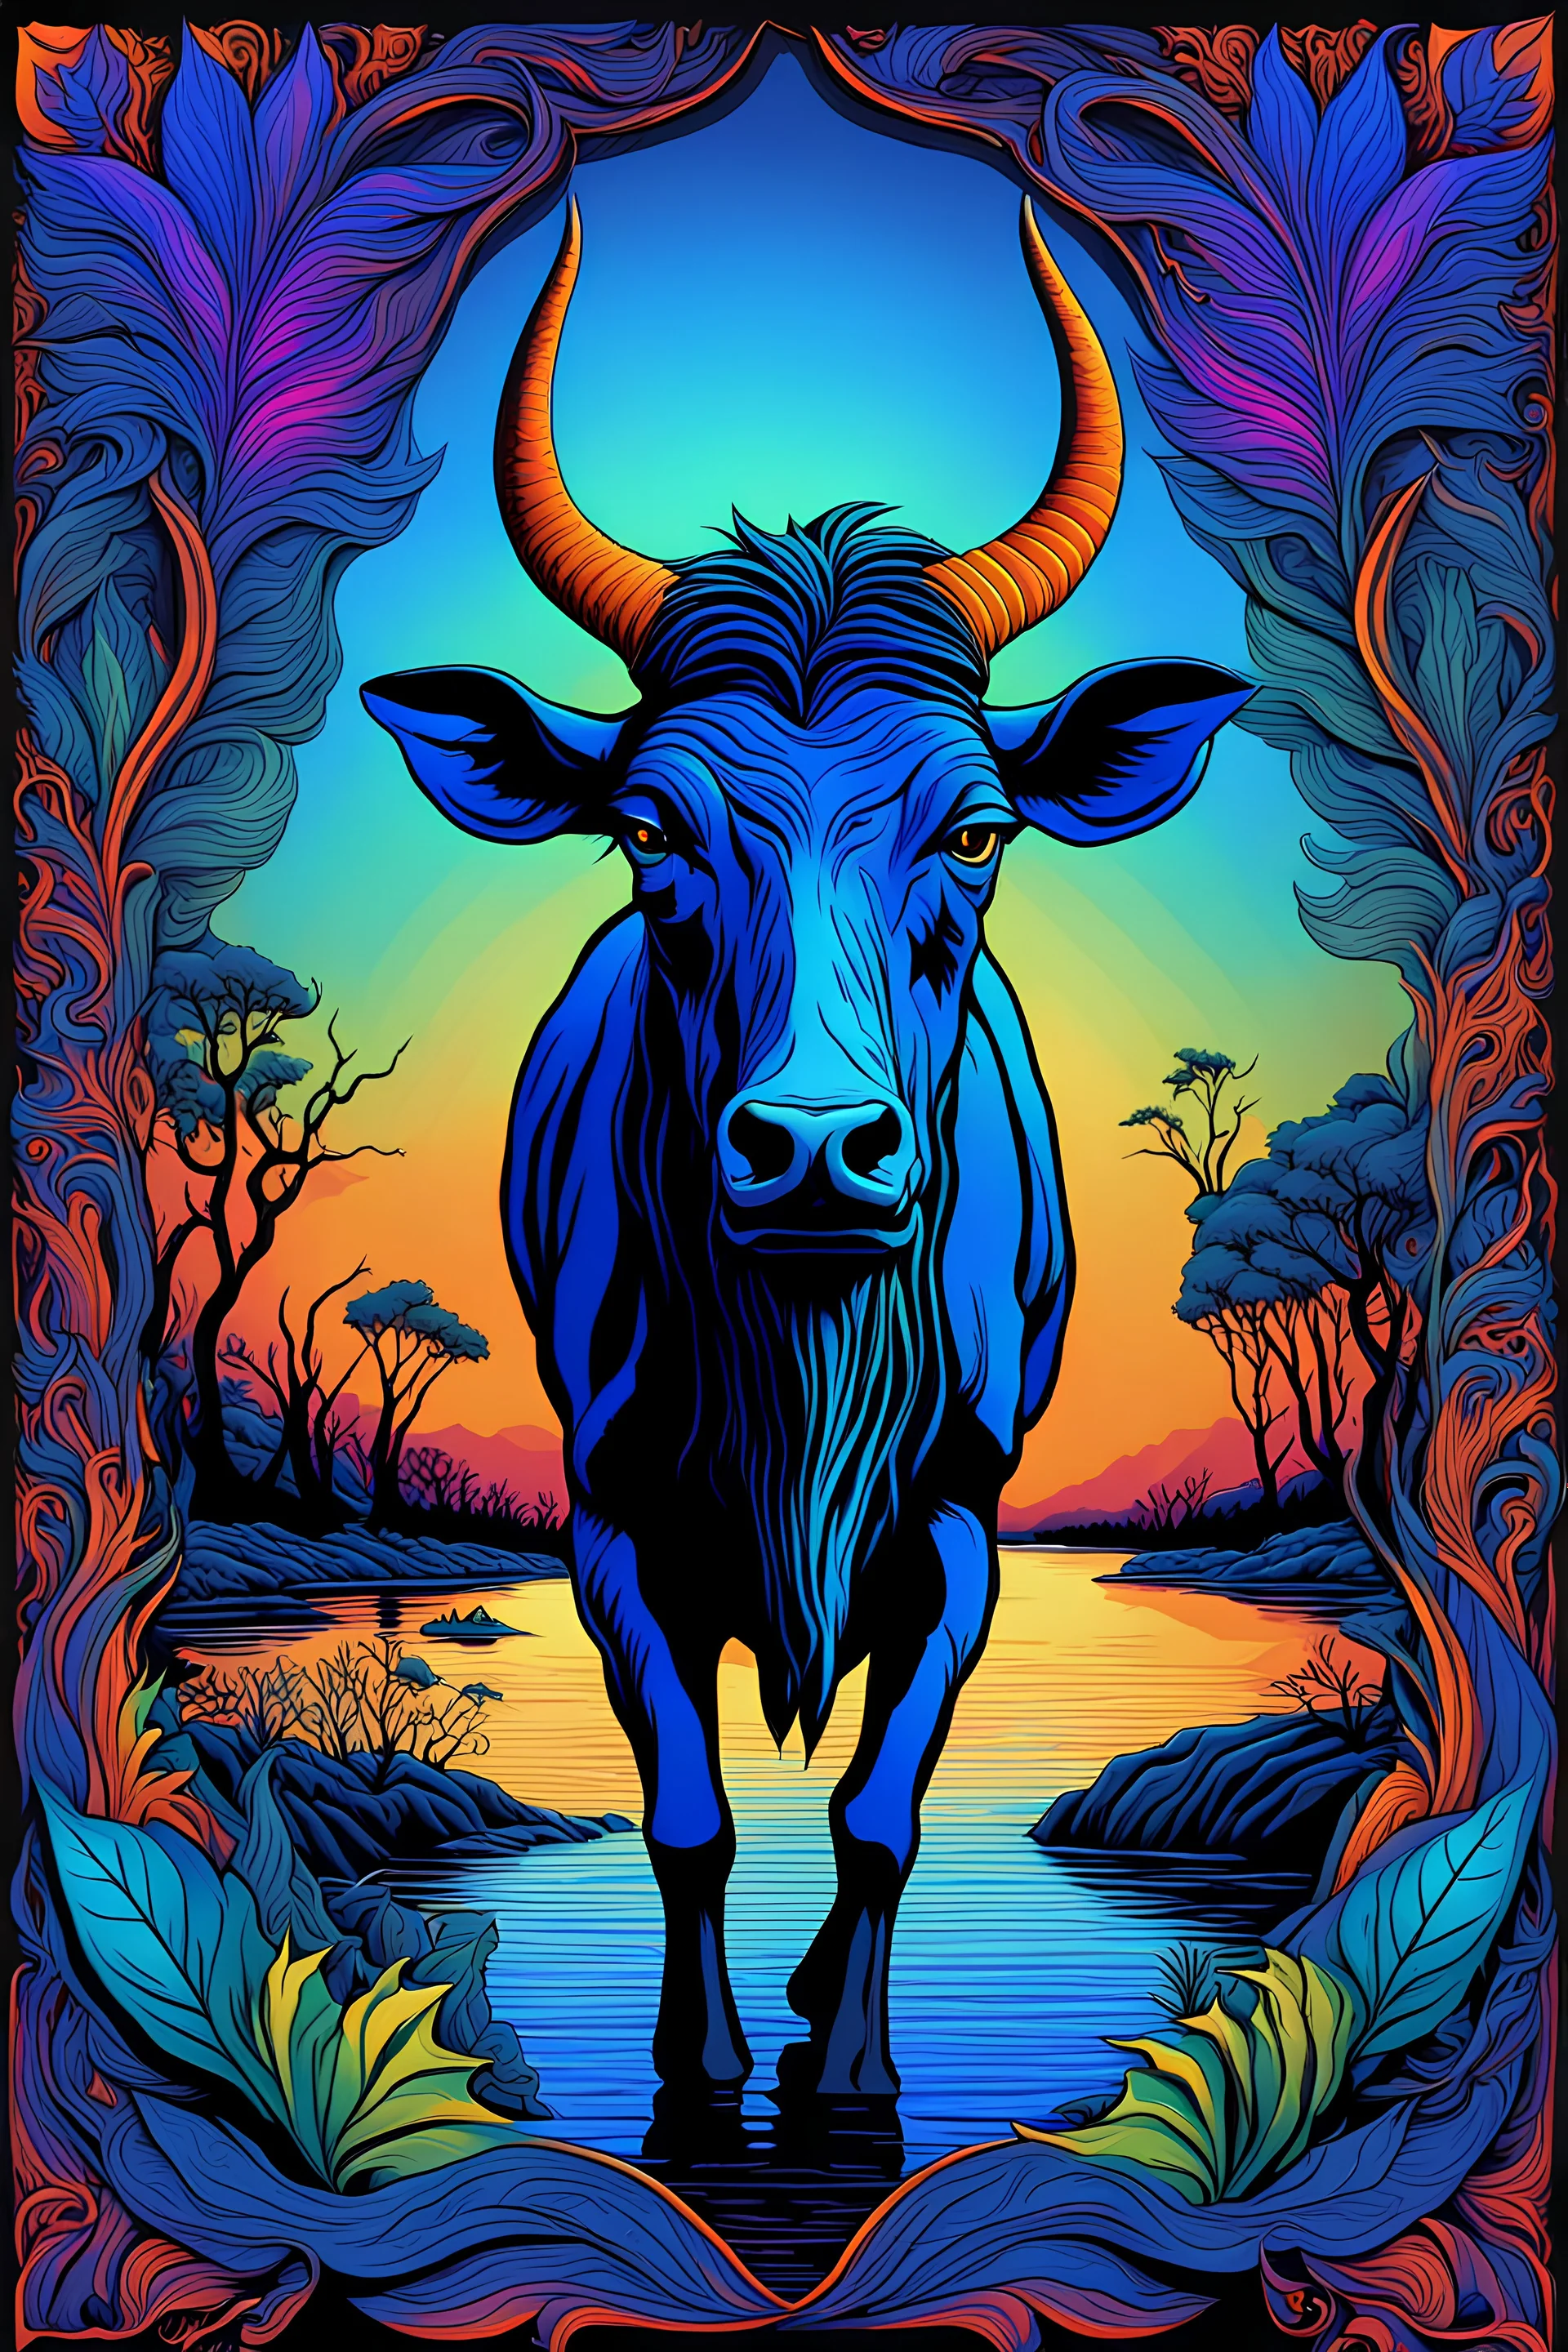 a blue wildebeest, 3D embossed textured ethereal image; midnight hues, extreme colors, a blue wildebeest by a river; trippin', psychedelic, groovy, art nouveau; indica, sativa, leaves, gig poster art, macabre, eldritch, bizarre, extreme neon colors, mixed media, velvet, blacklight, uv